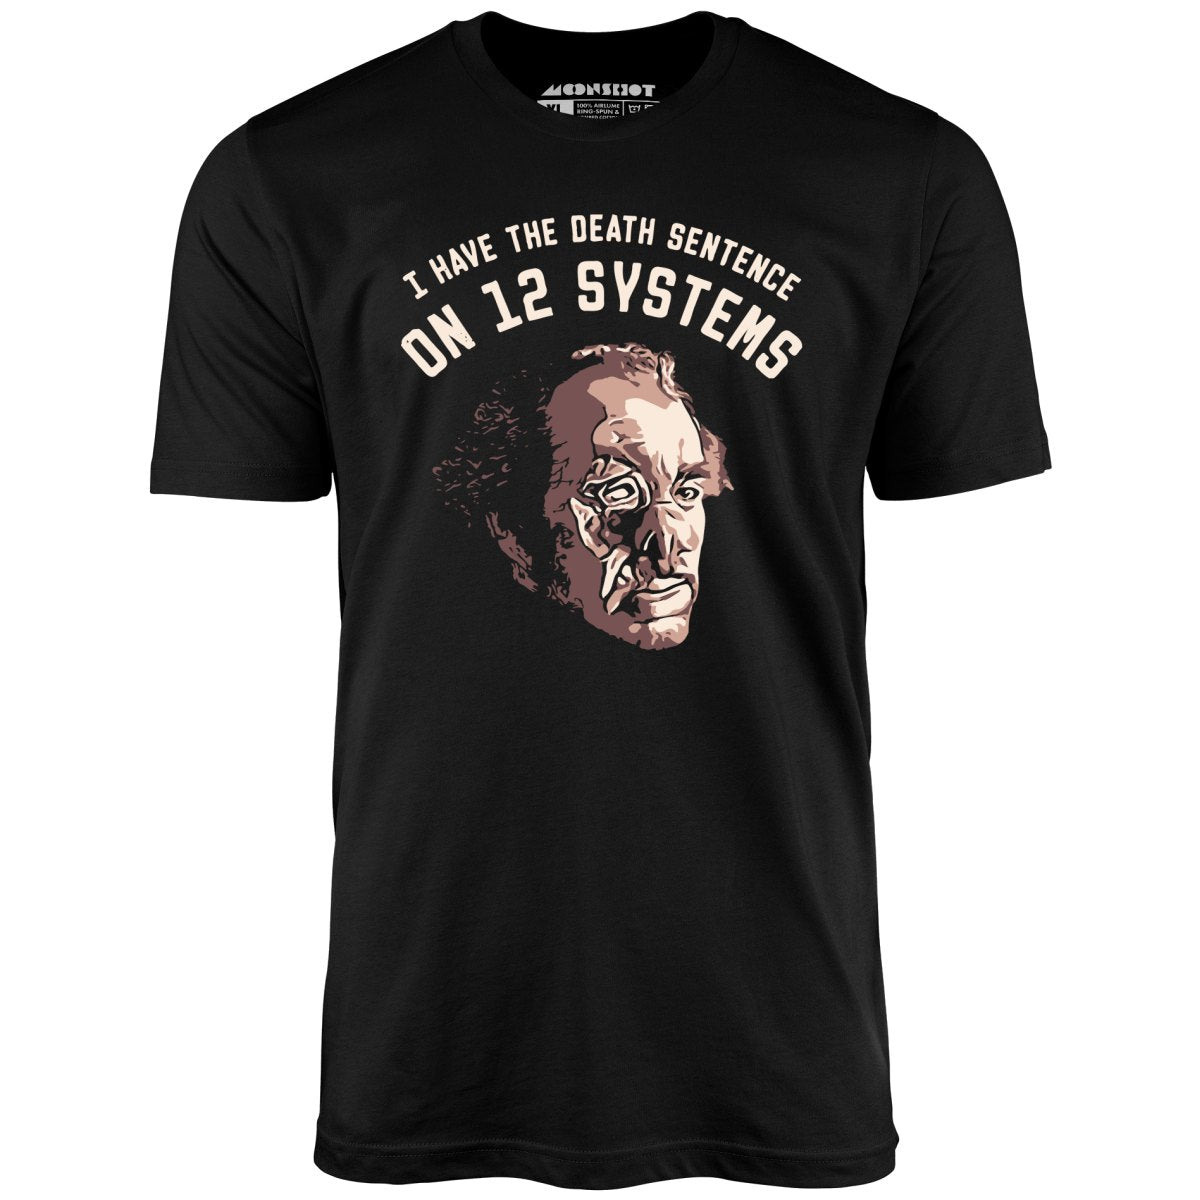 I Have the Death Sentence on 12 Systems - Unisex T-Shirt